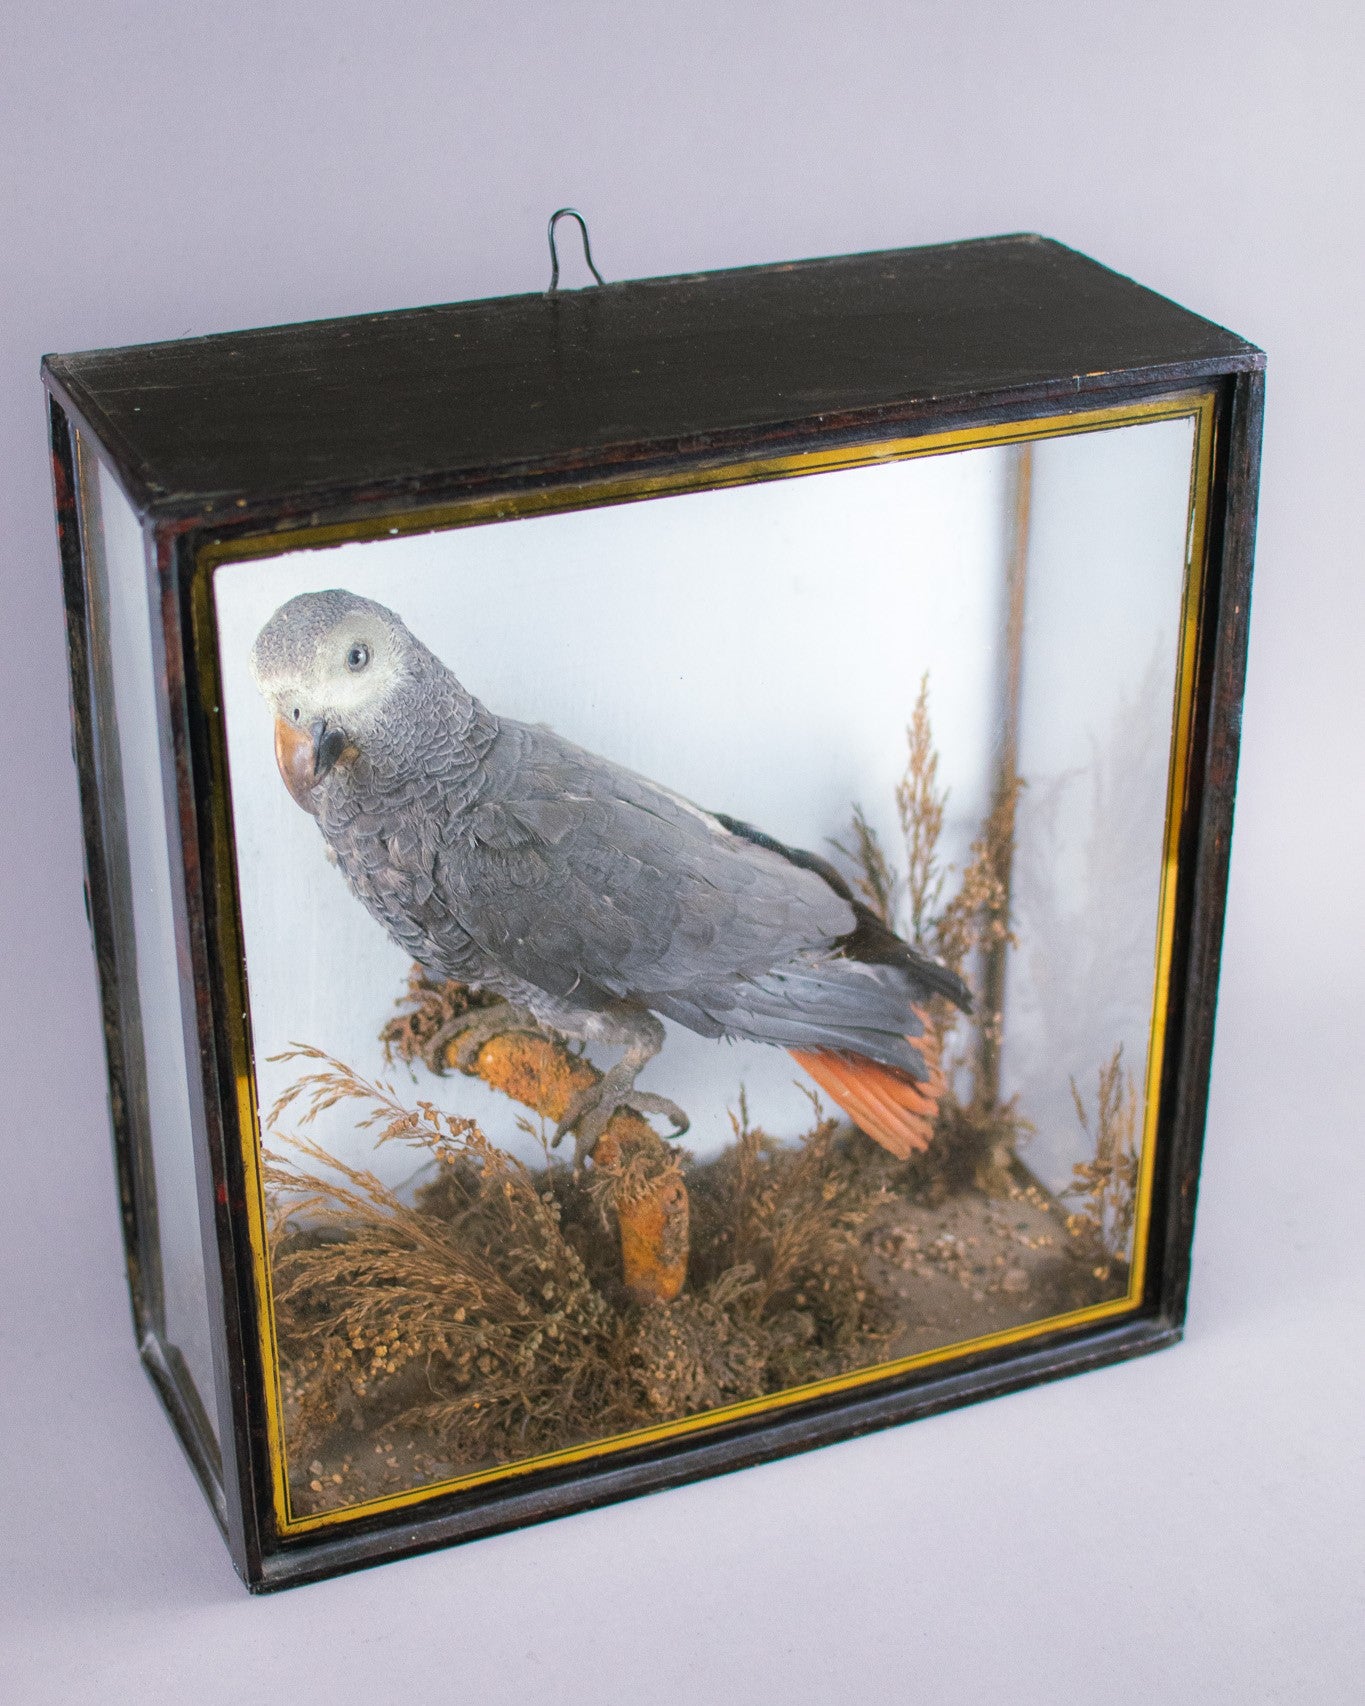 Taxidermy Cased Victorian African Grey Parrot (Psittacus Erithacus), Circa Late 1800's - Early 1900's